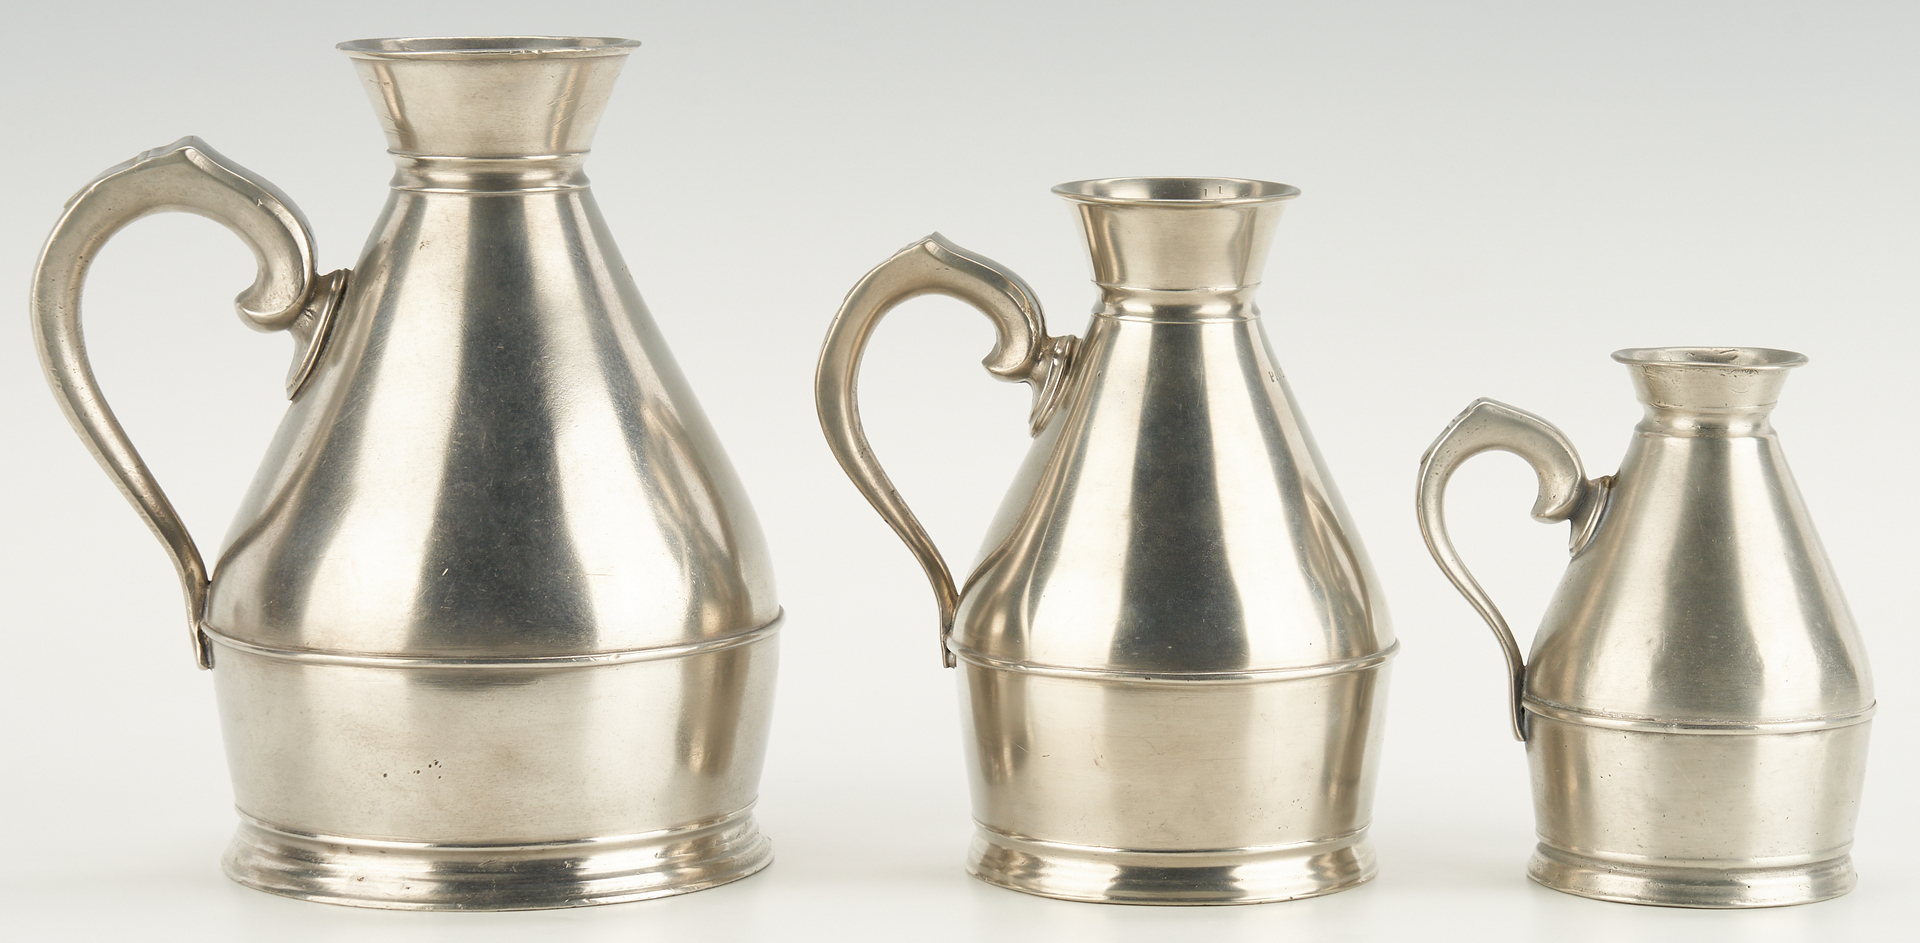 Lot 275: 11 Pcs. Pewter Flagons, Tankards, Jugs and Measures